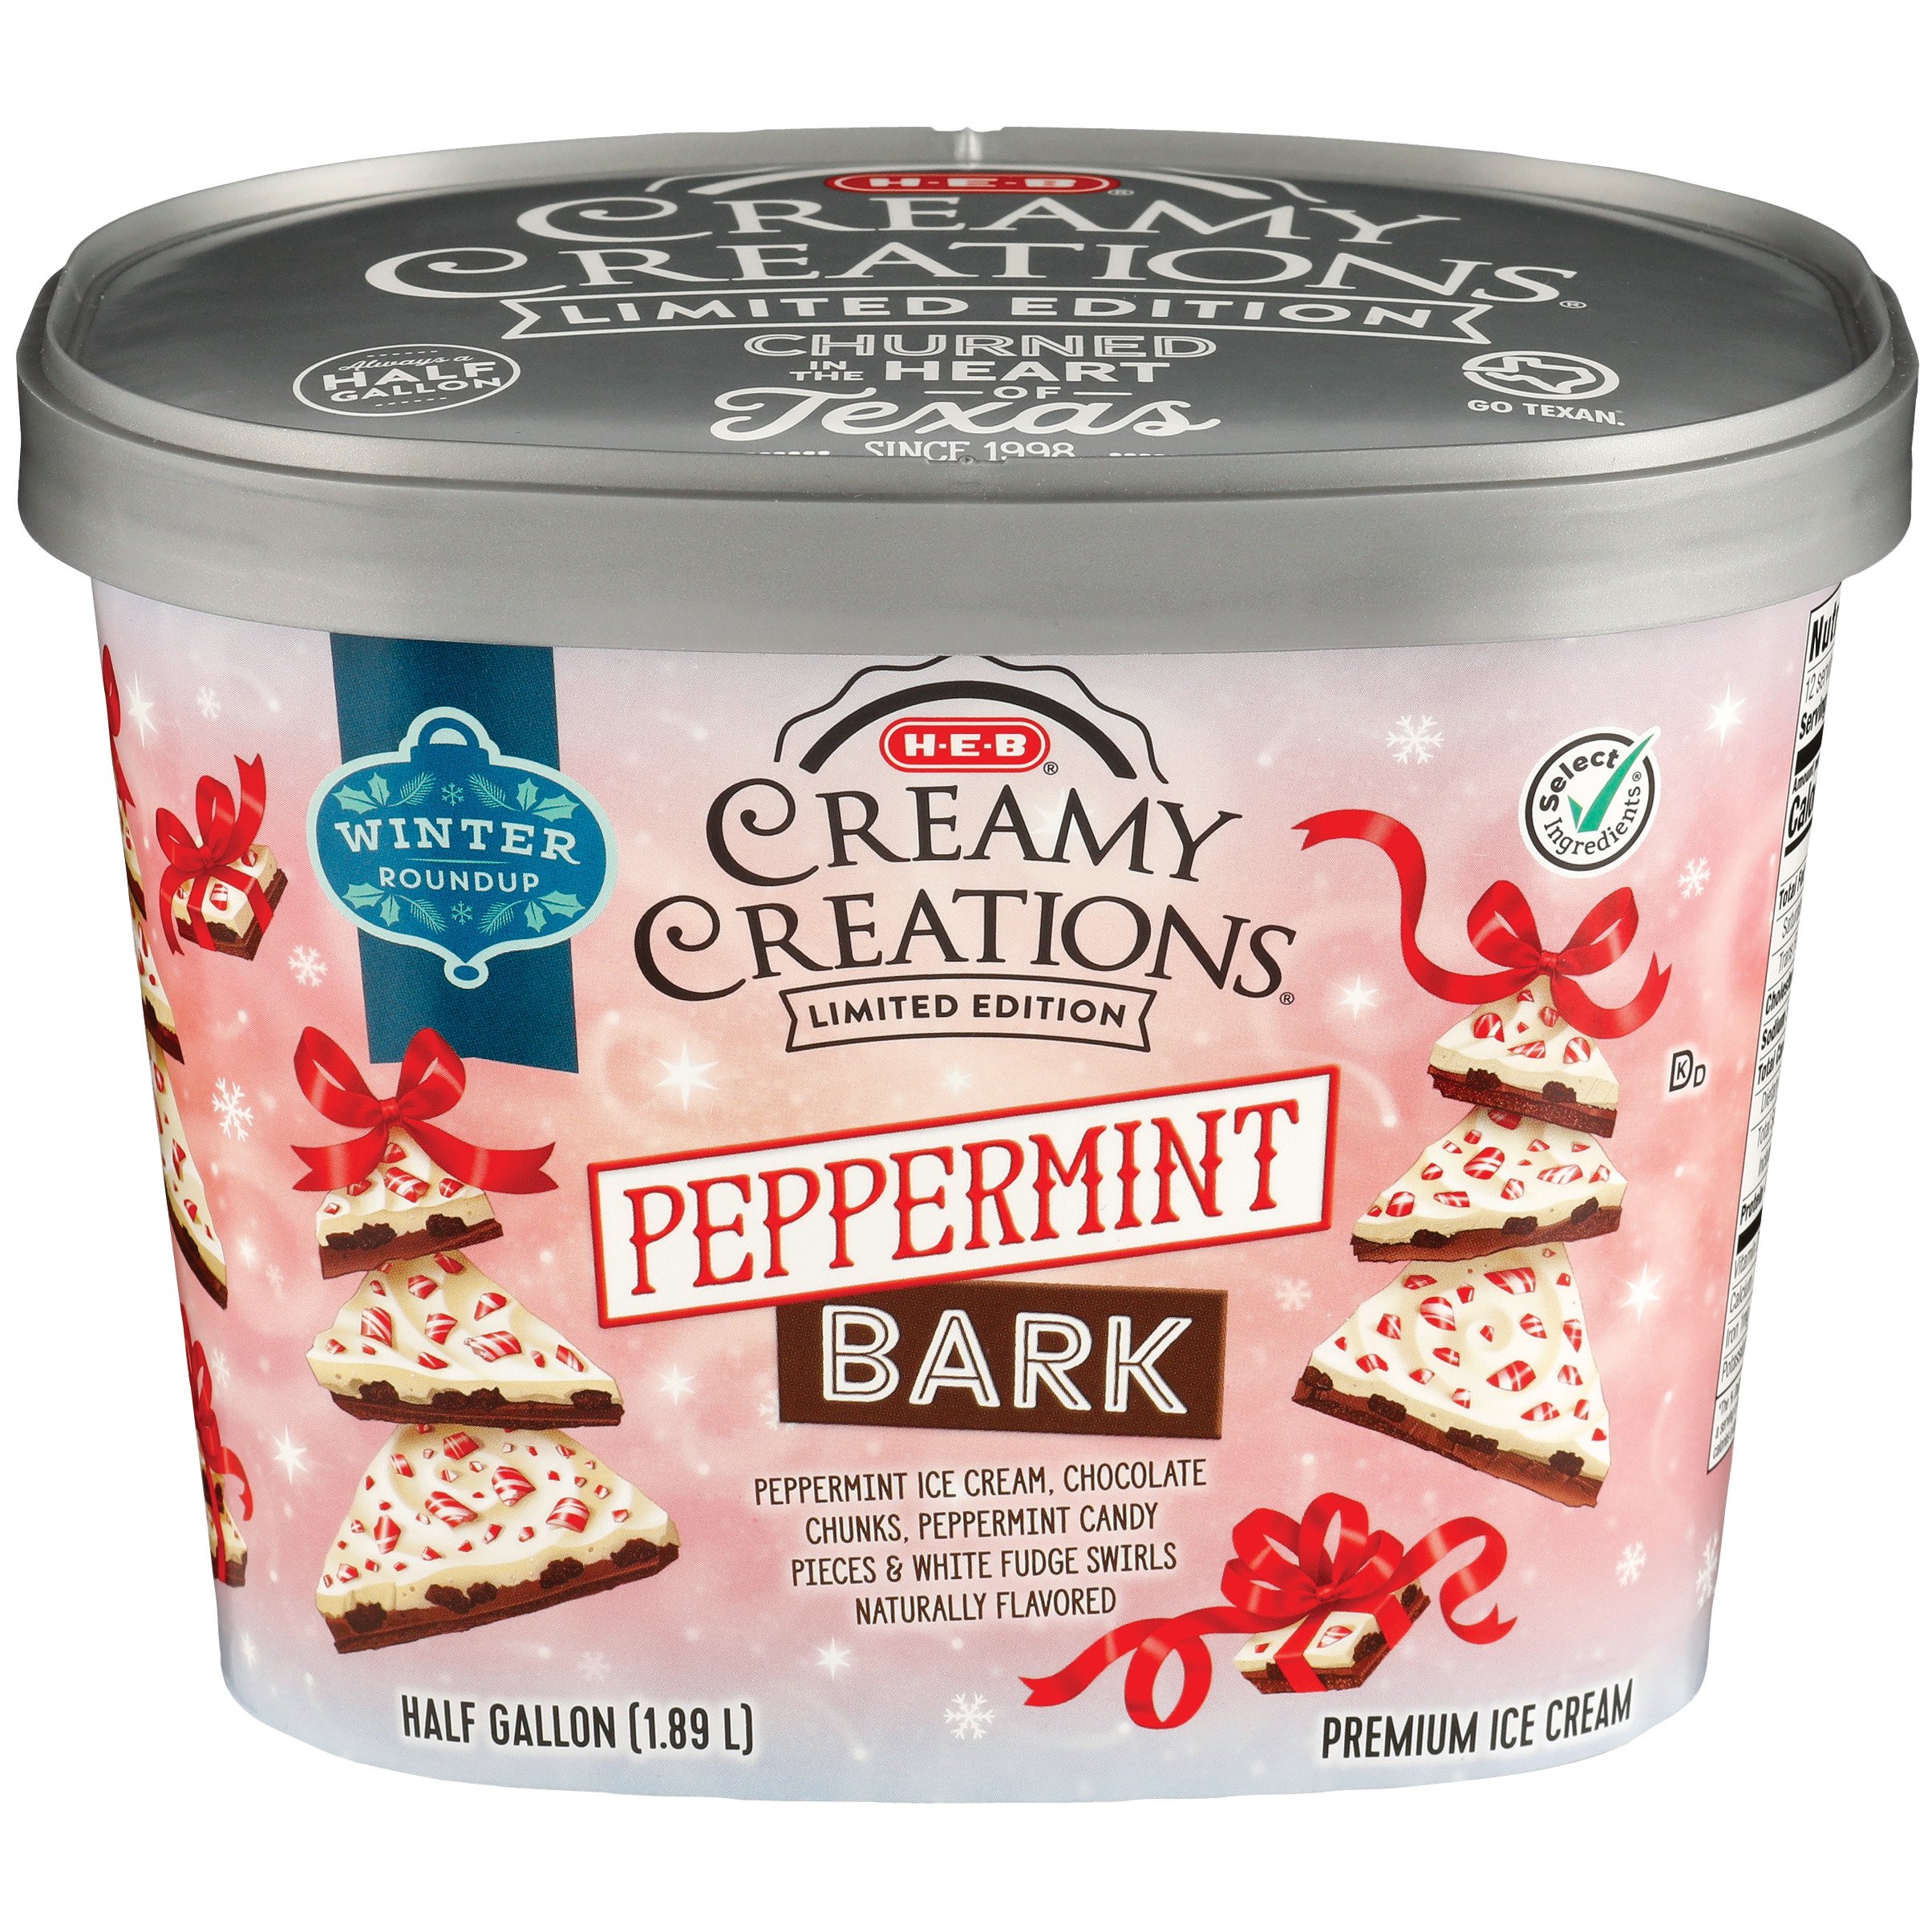 H E B Select Ingredients Creamy Creations Peppermint Bark Ice Cream Shop Ice Cream At H E B